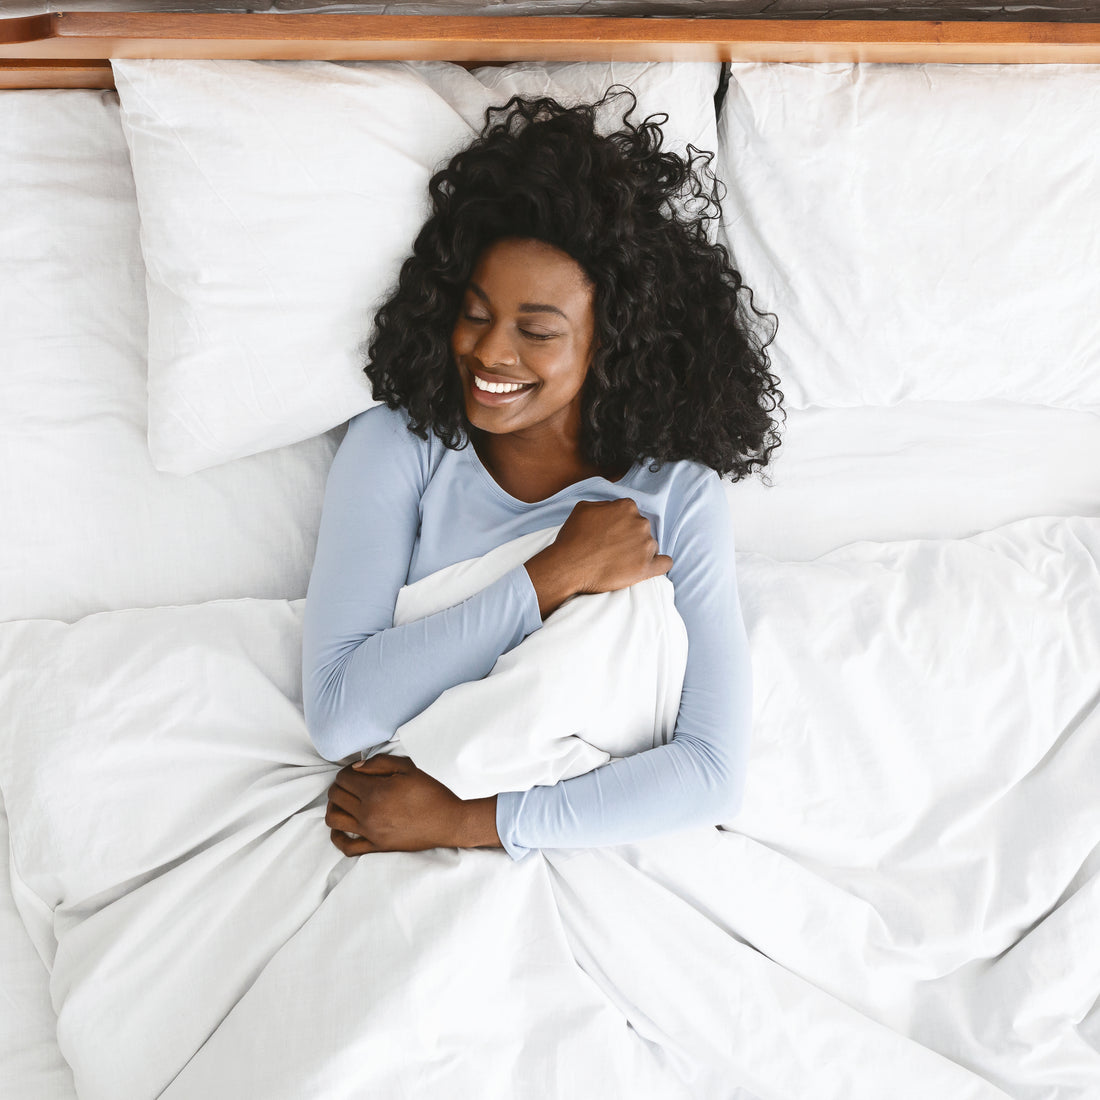 Should You Wear Underwear to Bed? Choose Organic Cotton Only